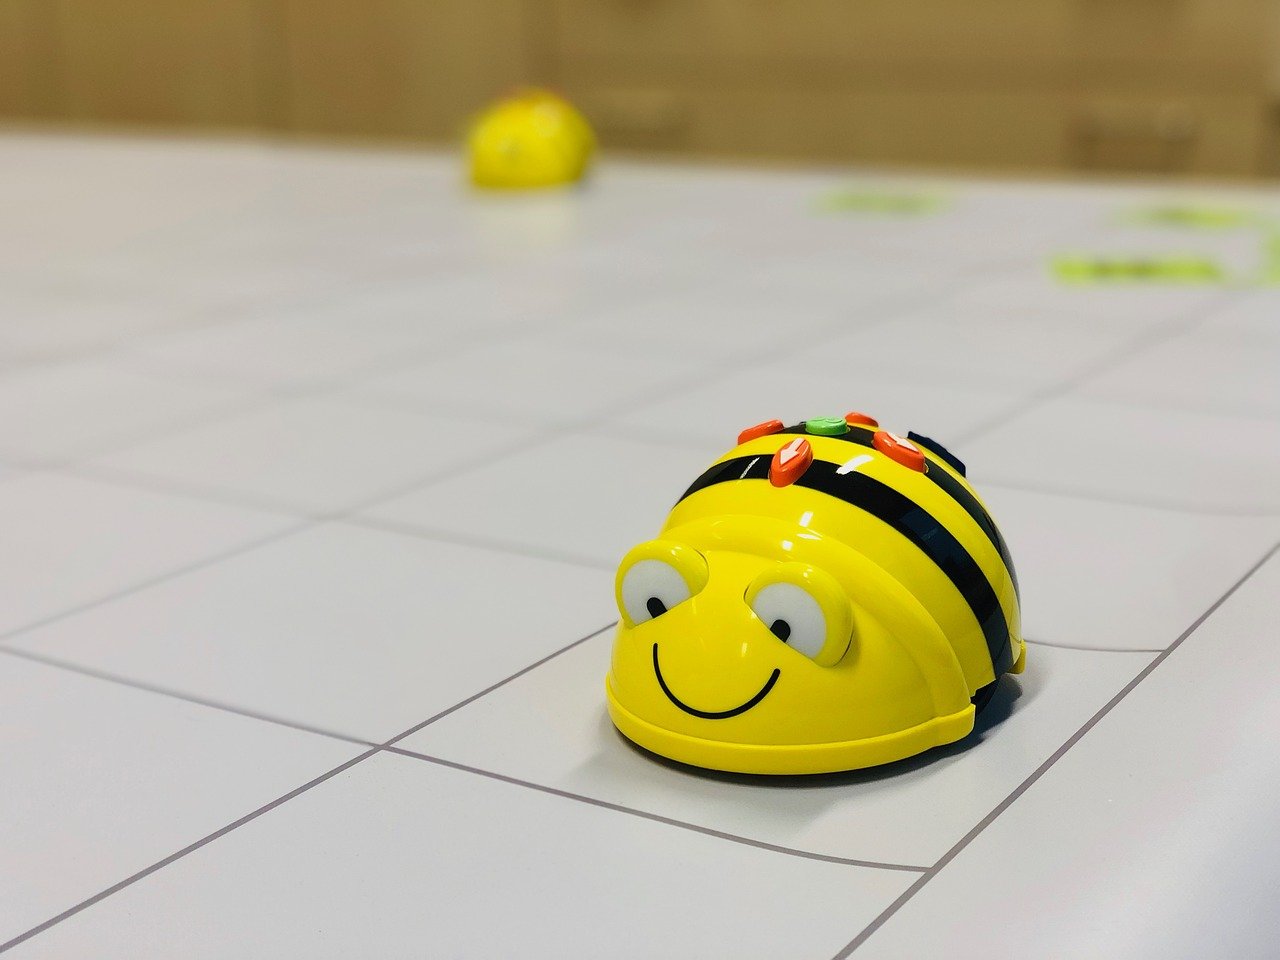 A Beebot